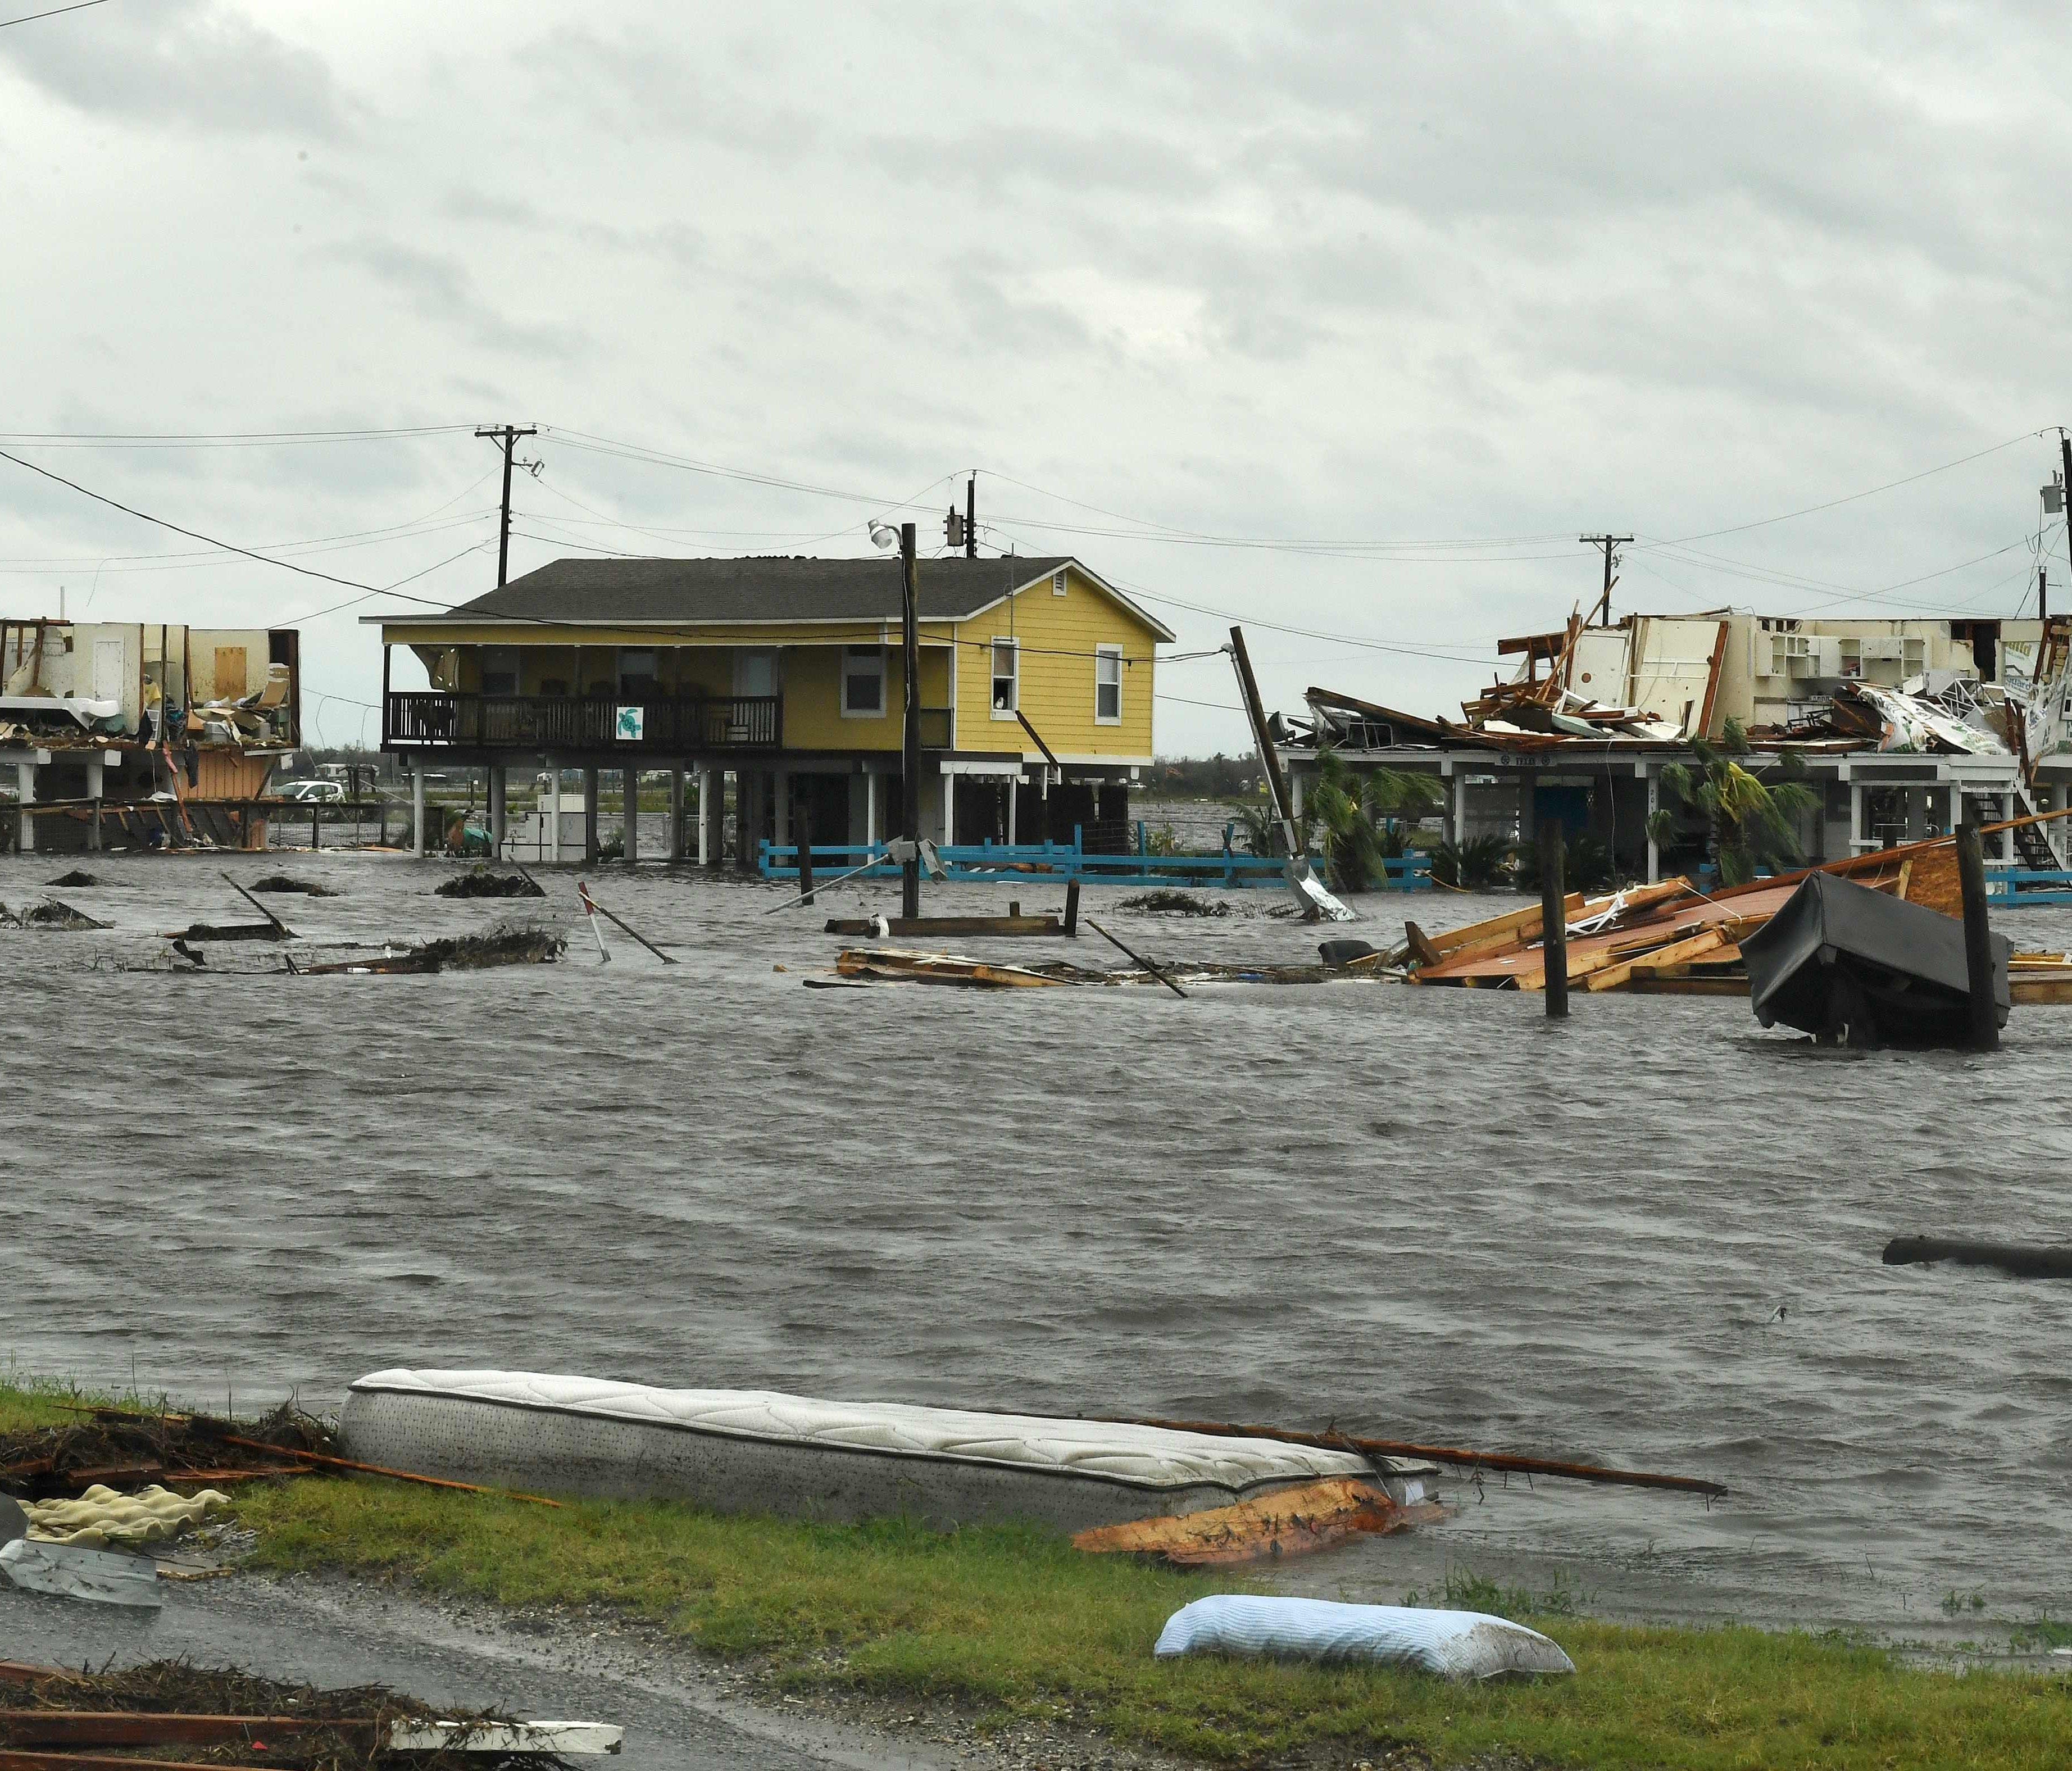 Flooded houses are seen after Hurricane Harvey hit Rockport, Texas, on August 26, 2017.